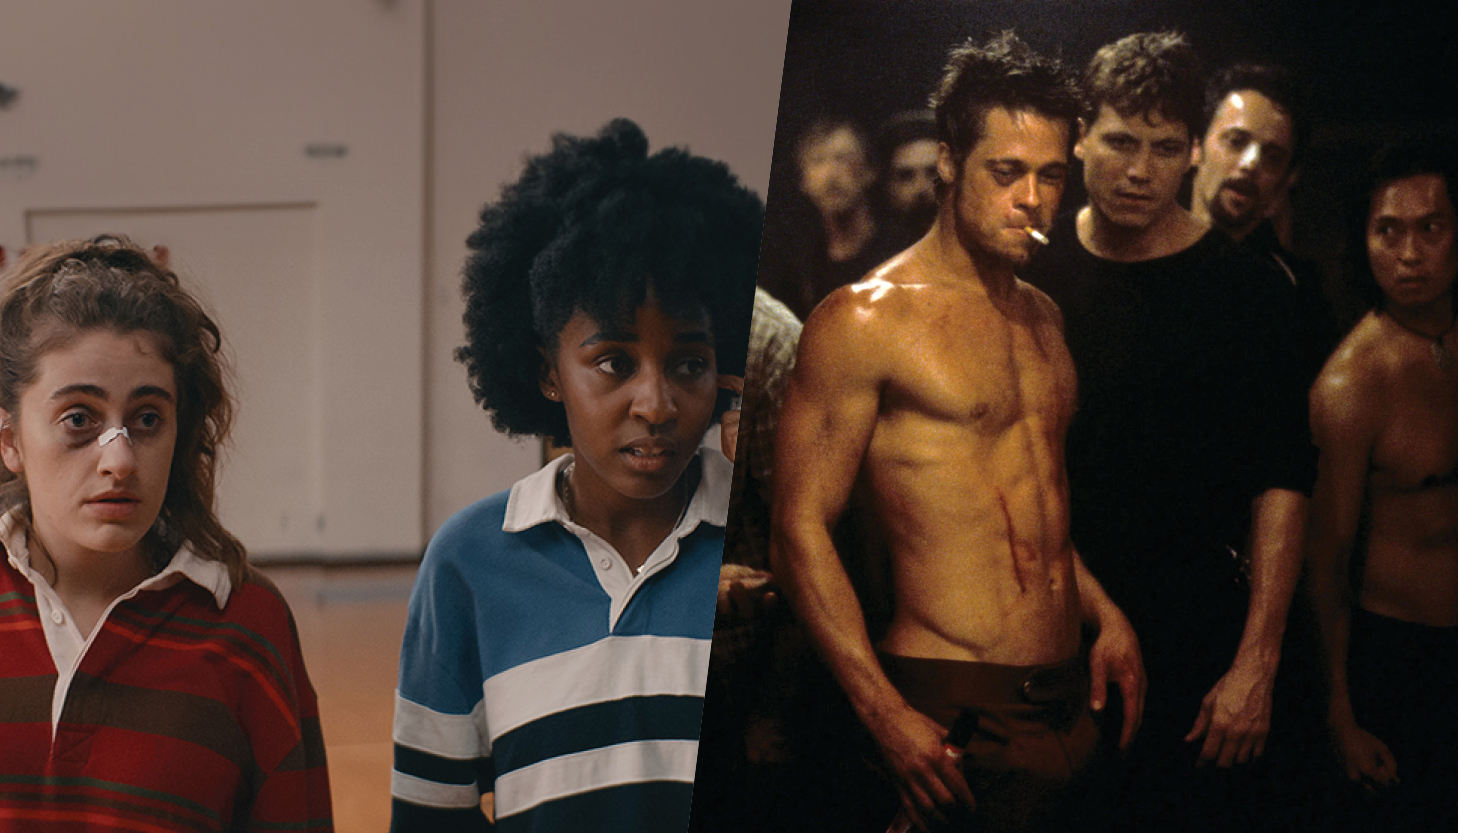 left image shows two teenage girls wearing polo shirts, one with a bandage on her nose; right image is a group of men with a shirtless Brad Pitt in front.